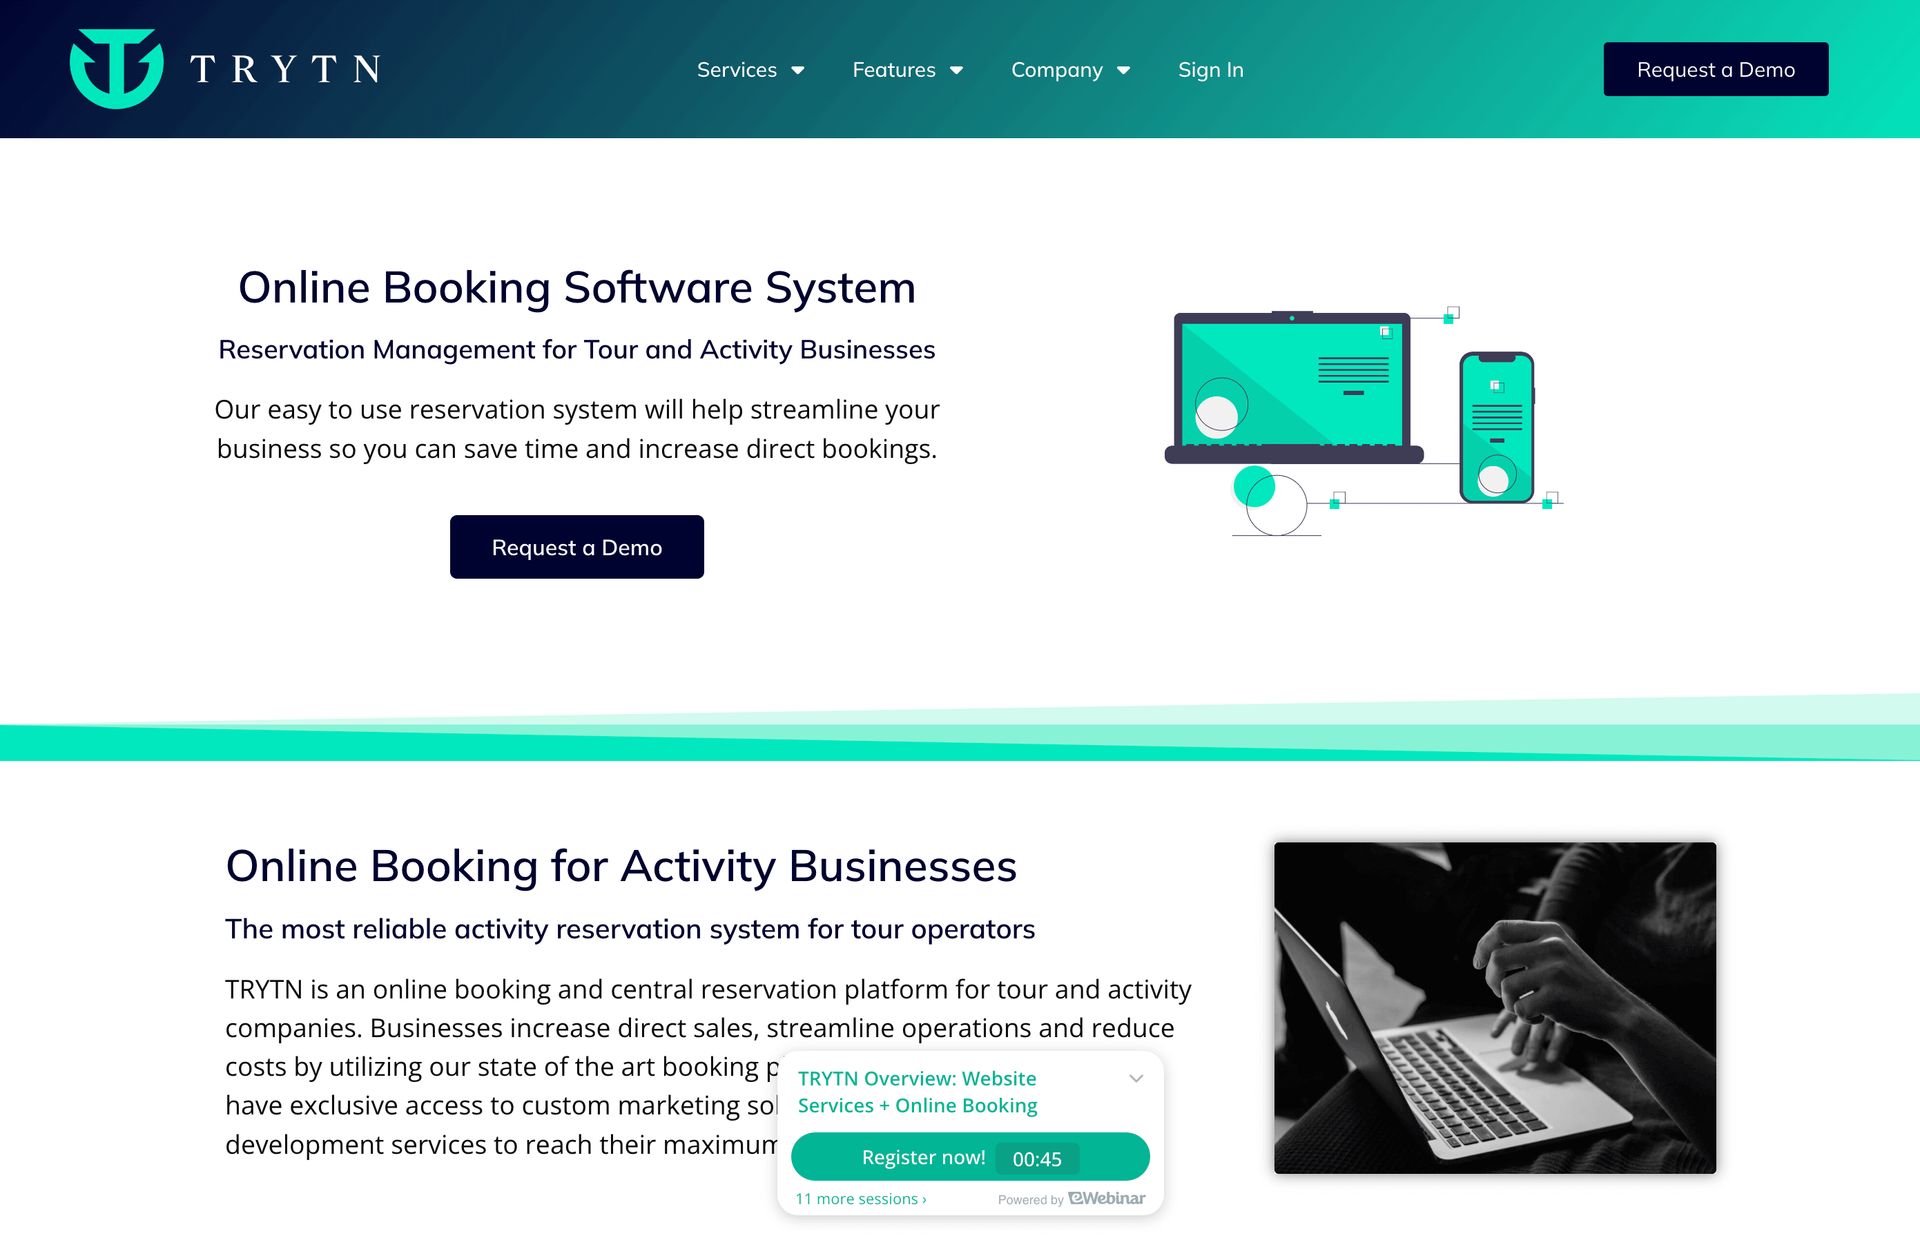 Trytn homepage: Online Booking Software System